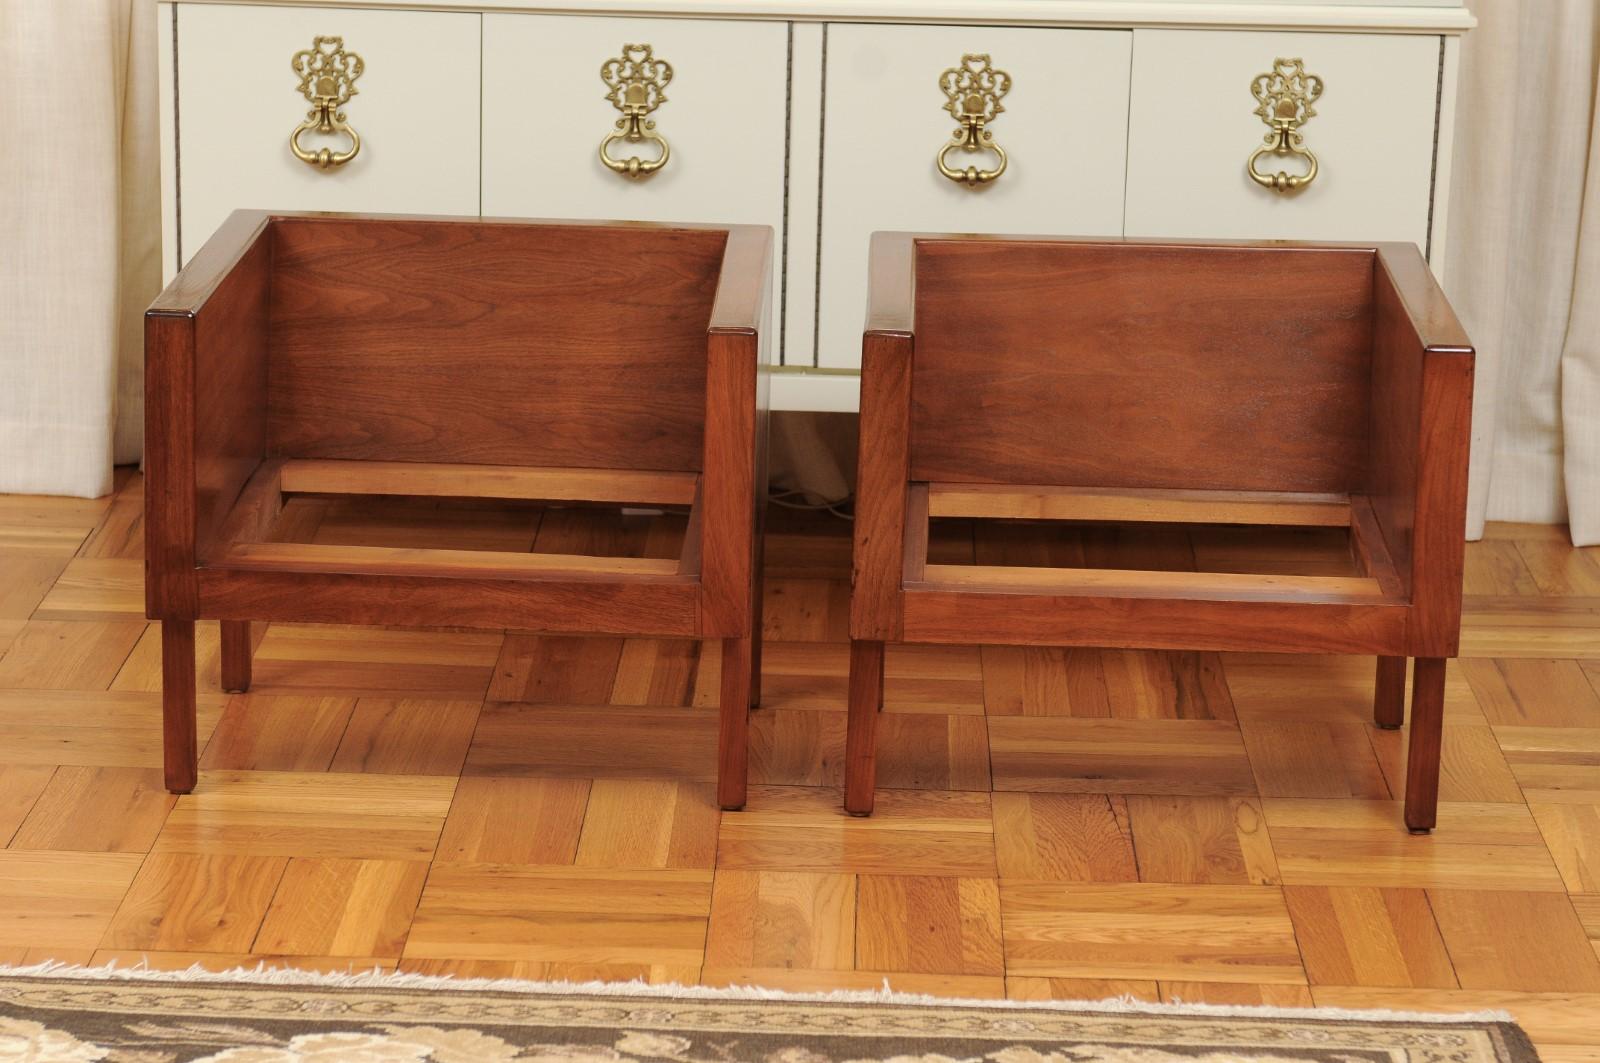 Late 20th Century Extraordinary Pair of Walnut Cube Probber Style Loungers - 2 Pair For Sale